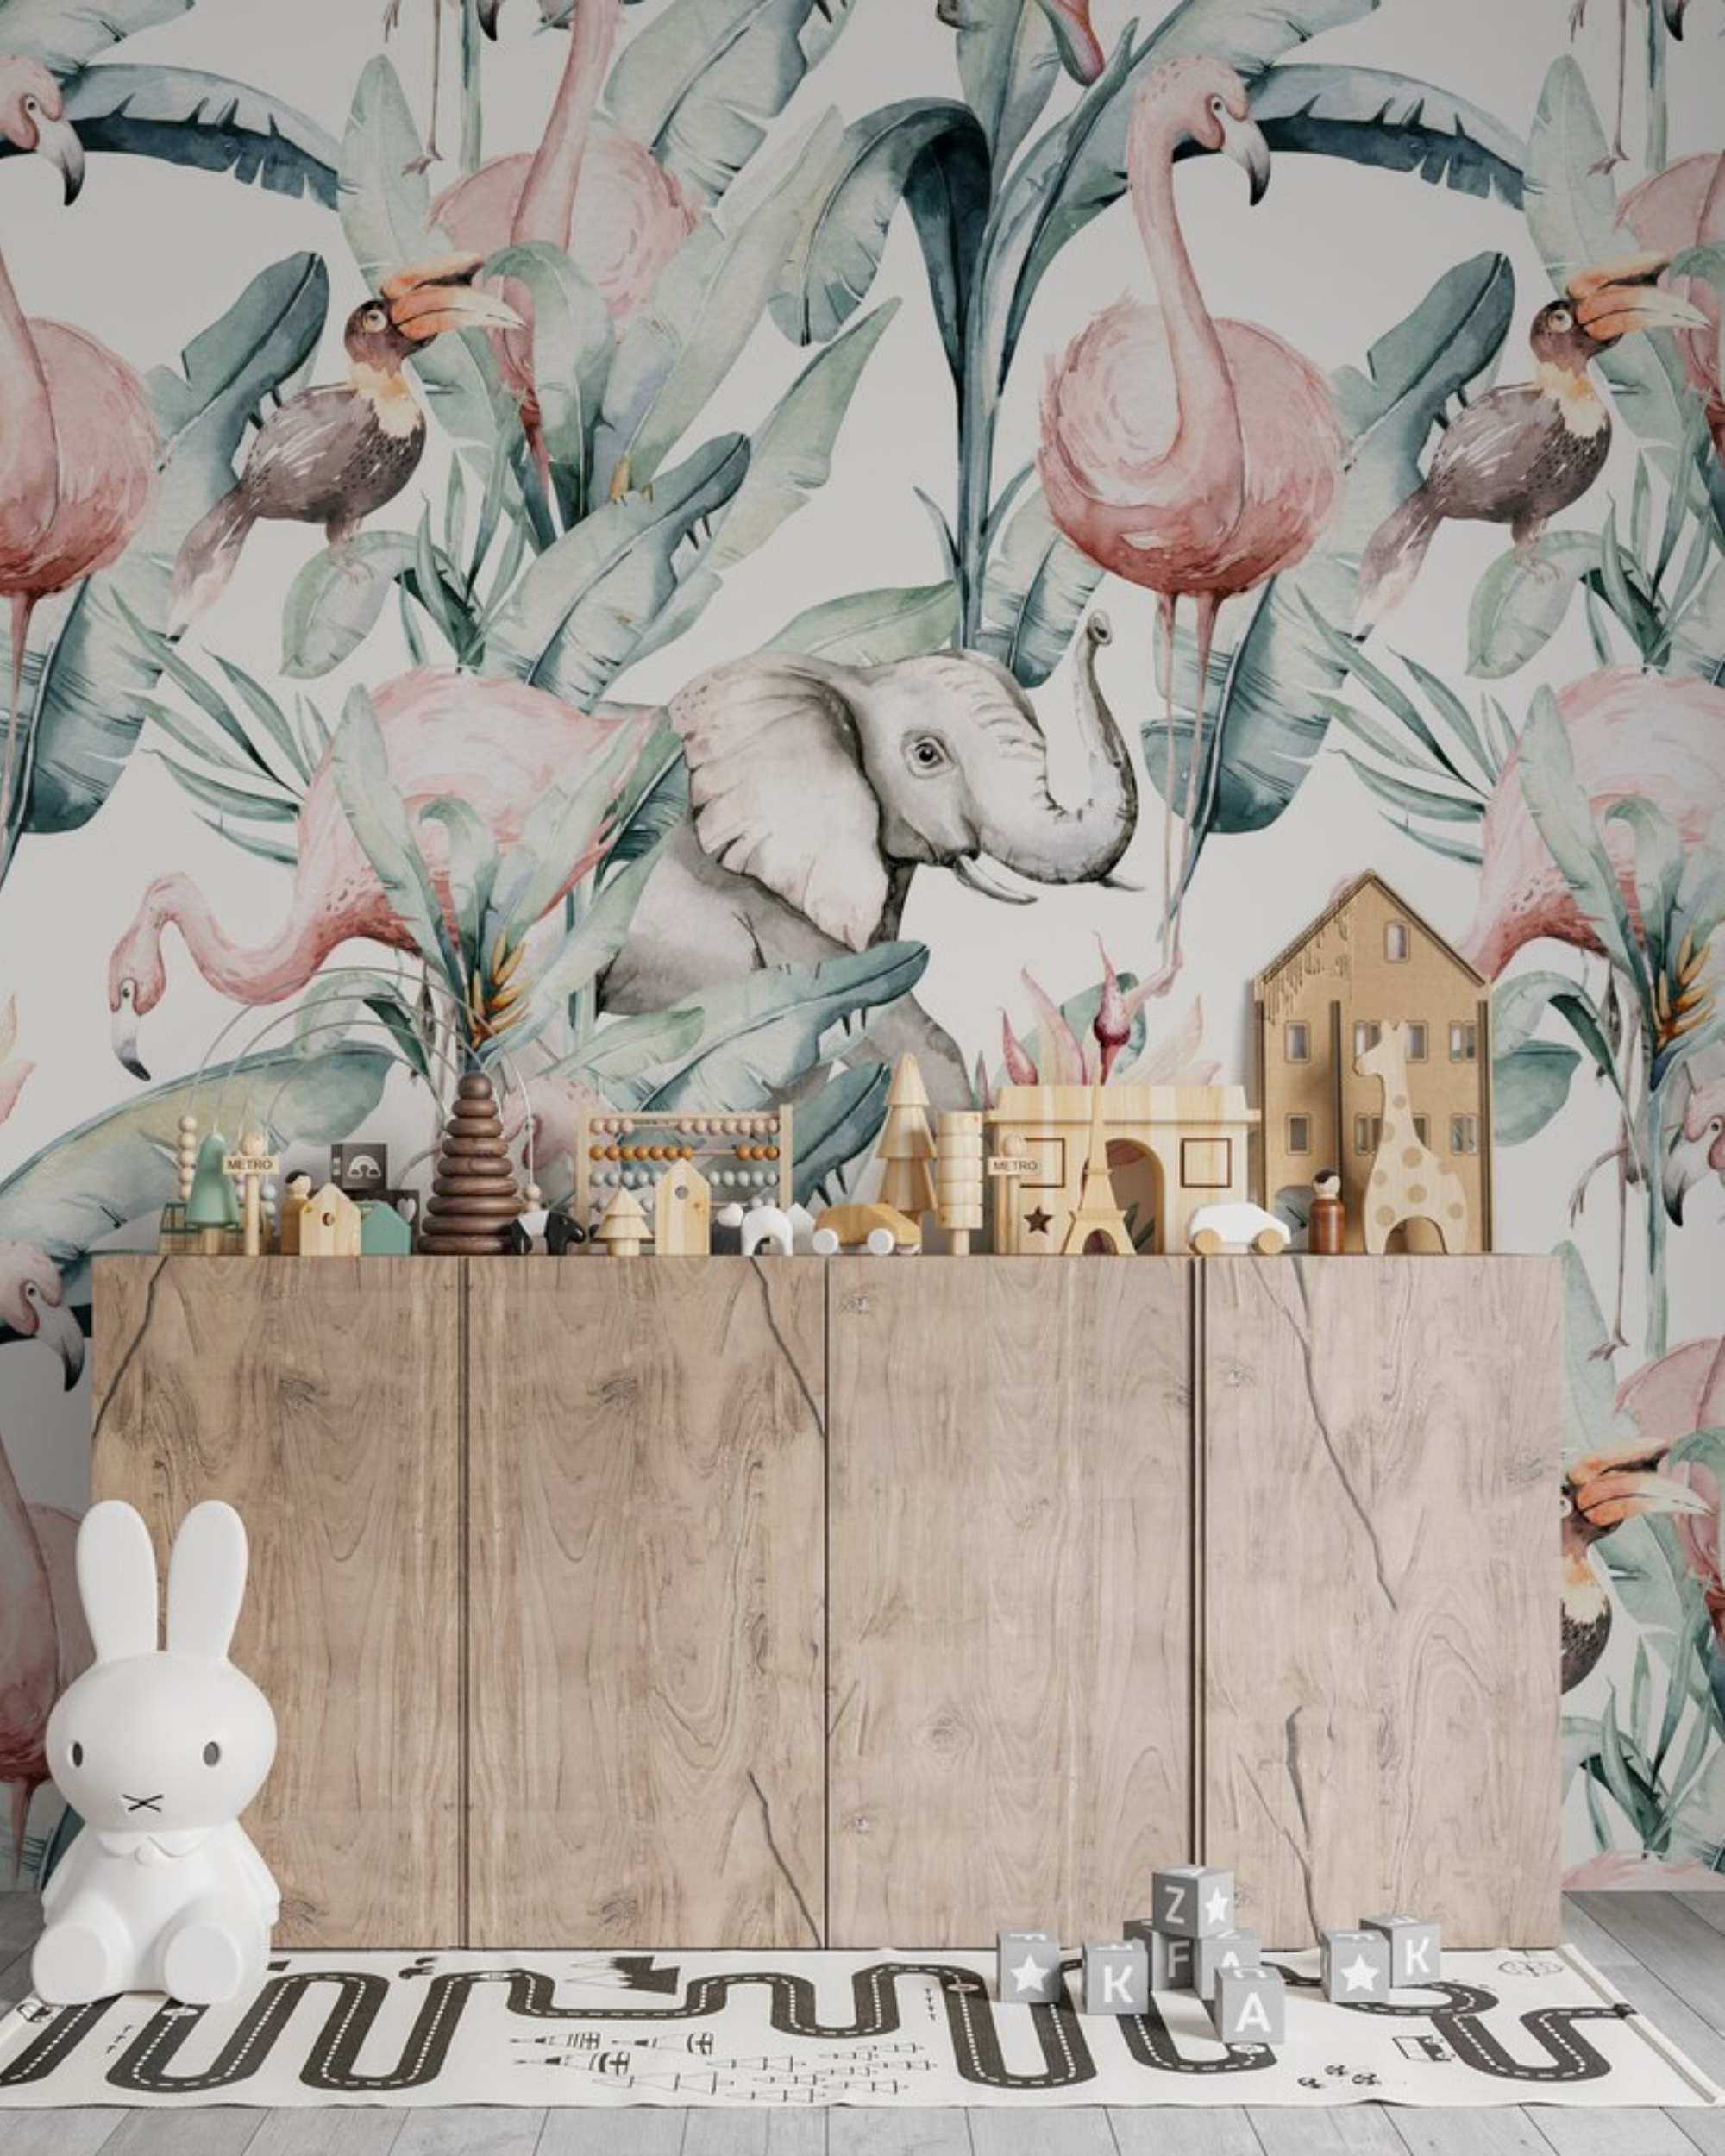 Children's playroom featuring 'Tropical Wallpaper - African Animals' with a vibrant scene of elephants, flamingos, and tropical foliage, complemented by a wooden toy storage unit filled with colorful toys.